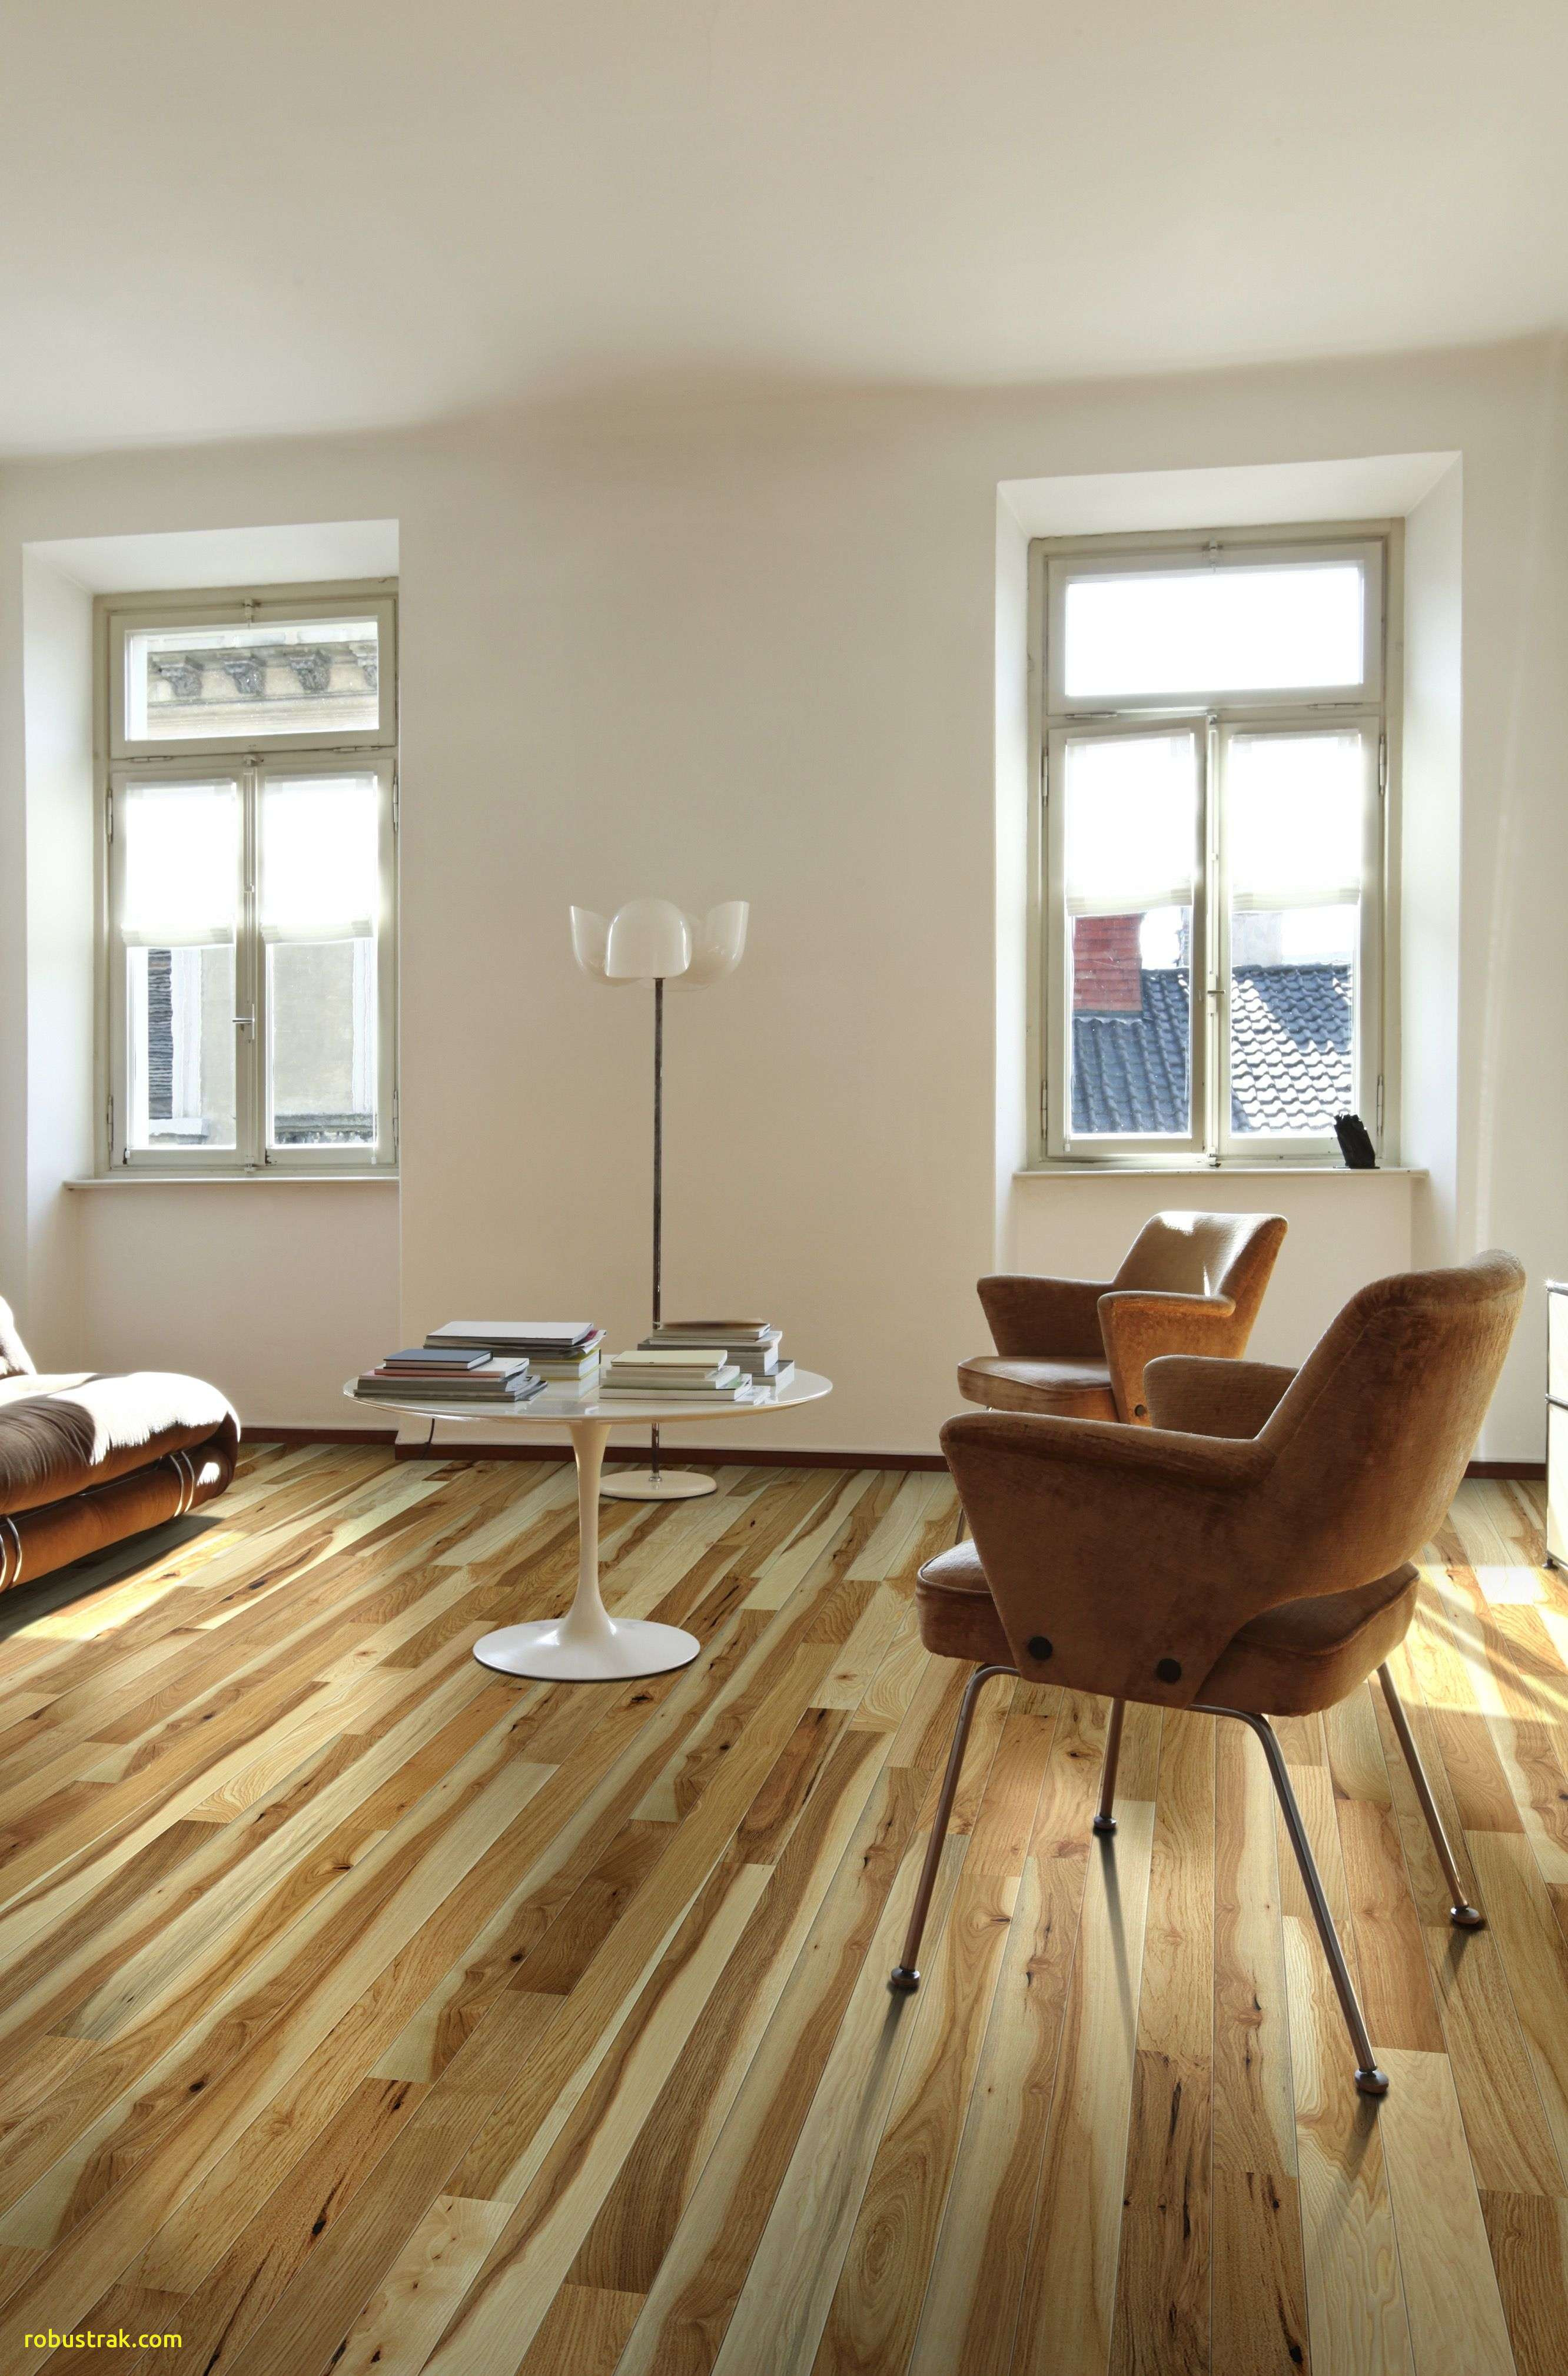 hickory hardwood floors pictures of awesome furniture for light wood floors home design ideas with pre finished hardwood floor installation services in kansas city by svb wood floors if your home